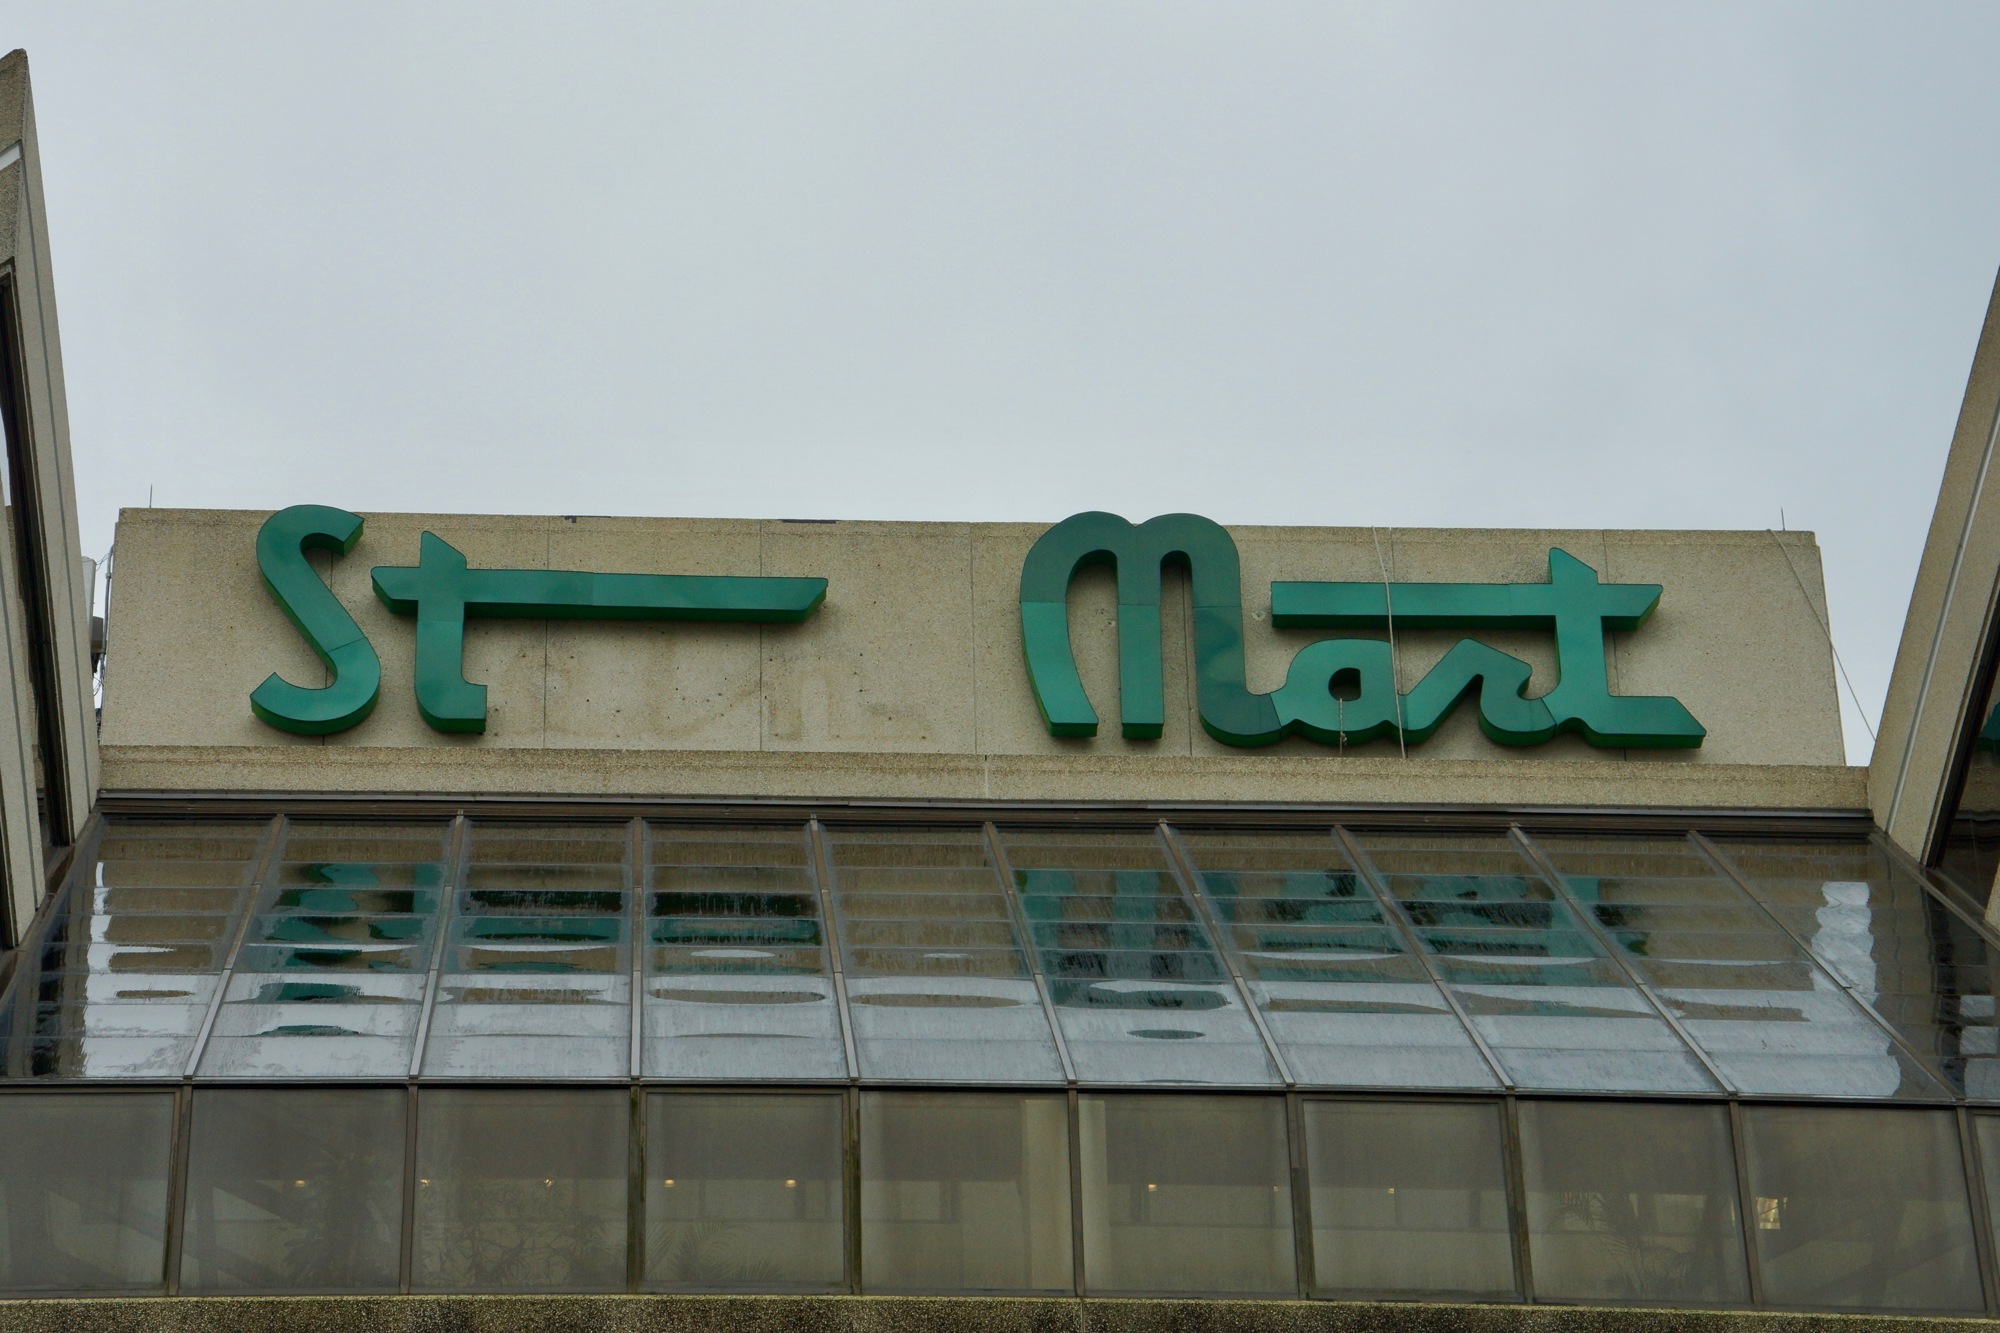 Workers continue removing letters from the  Stein Mart headquarters sign.